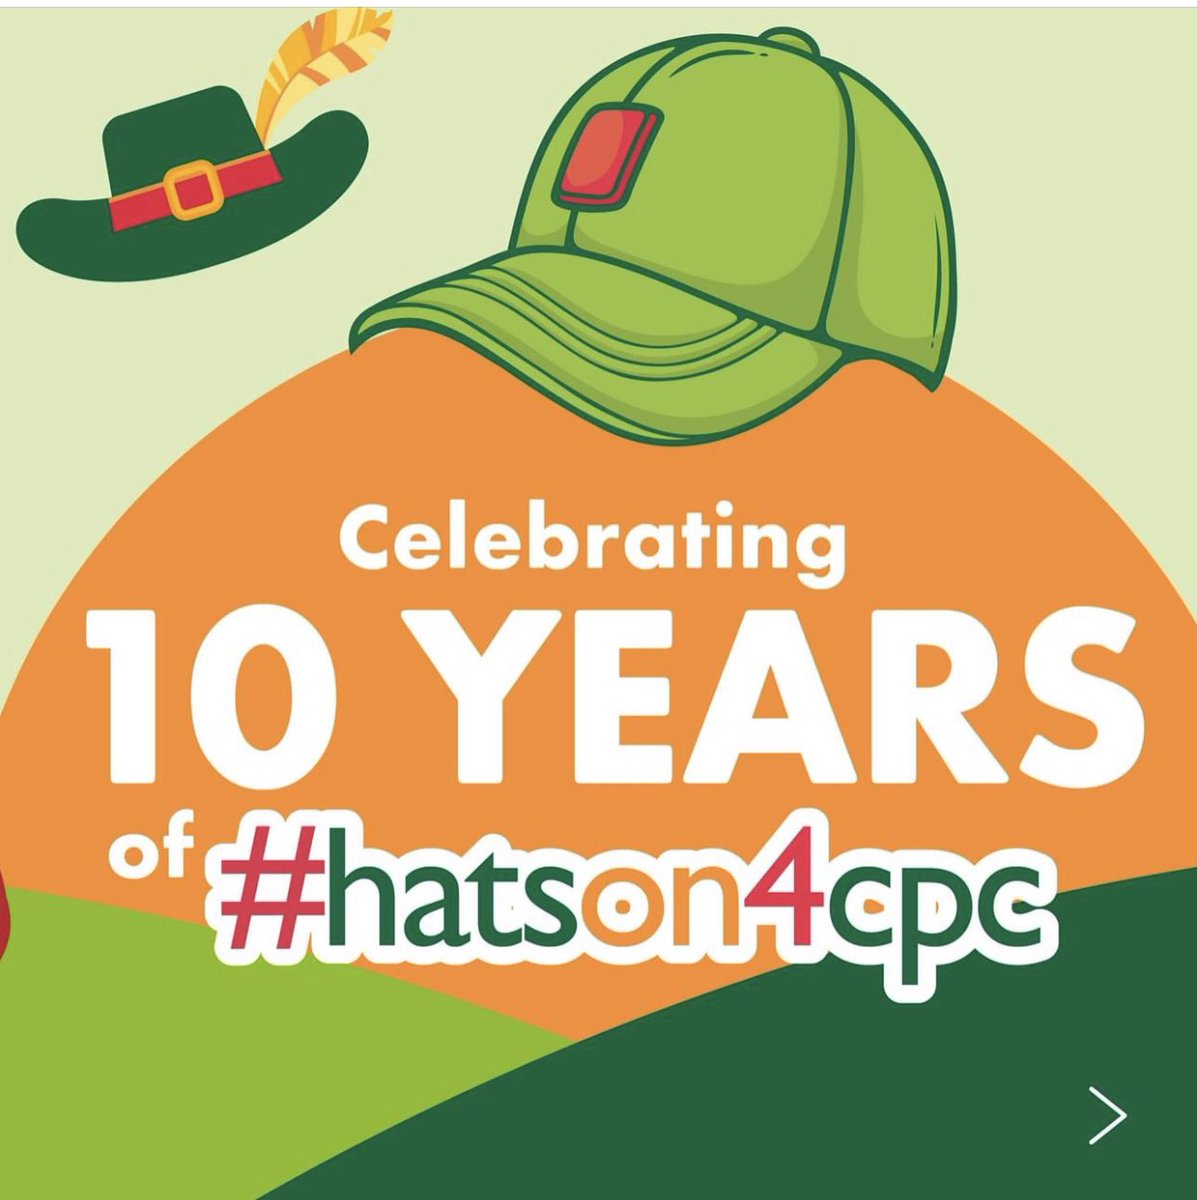 HatsOn4CPC as we raise awareness of the palliative care needs of children globally. As SOHH , we represent the needs of children of the Kingdom of Lesotho facing life limiting conditions such as cancer etc. 
#ICPCN #APCA #WHPCA #IAHPC #PallCHASE #Teb_Lepheane